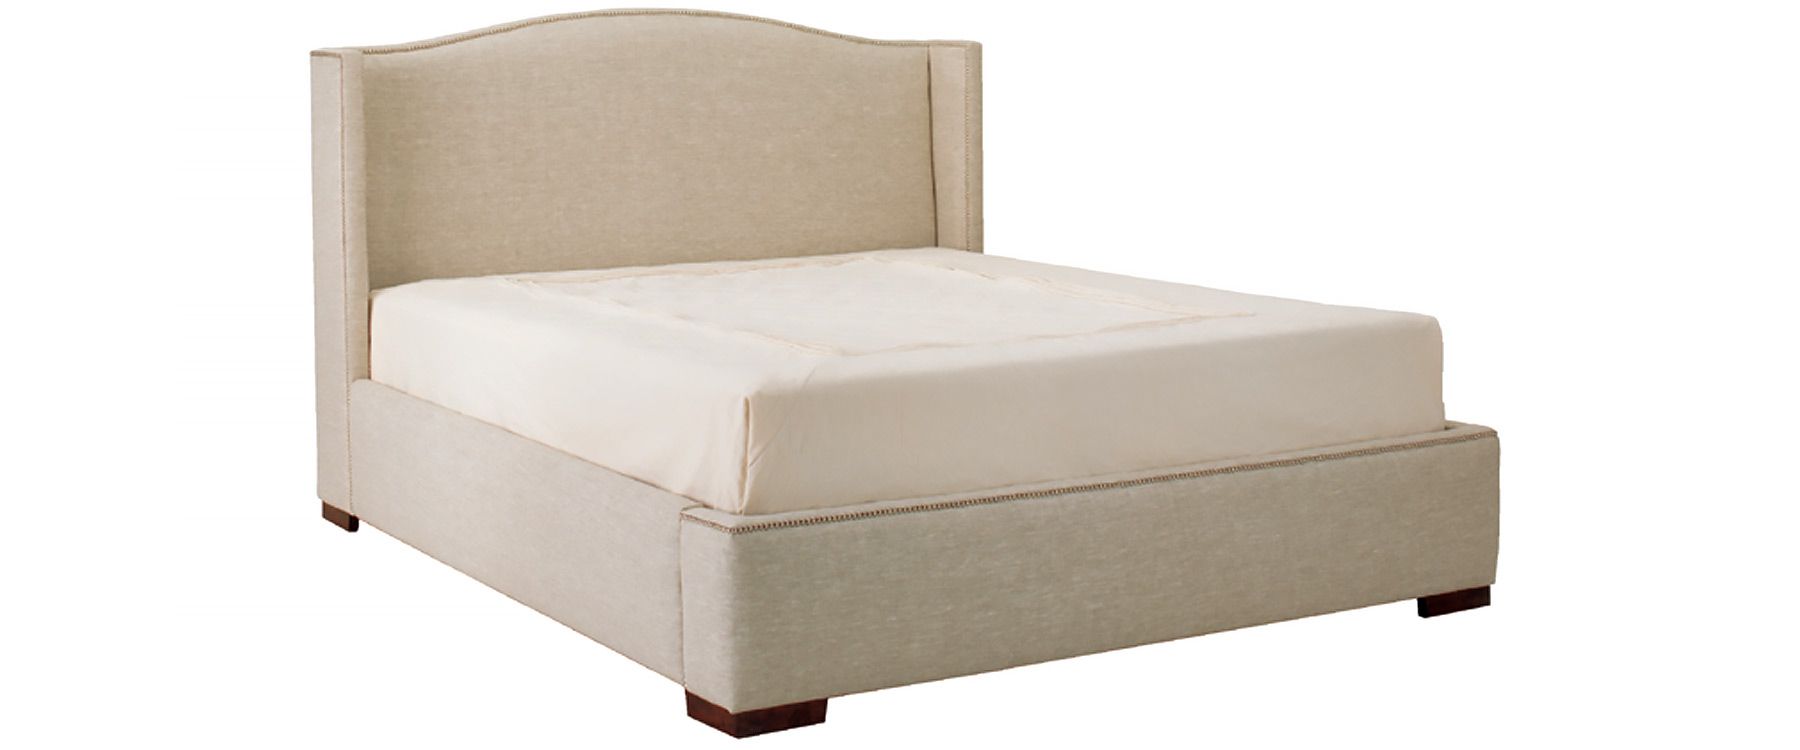 Well Known Marissa Sofa Chairs Pertaining To The Marissa Bed (View 20 of 20)